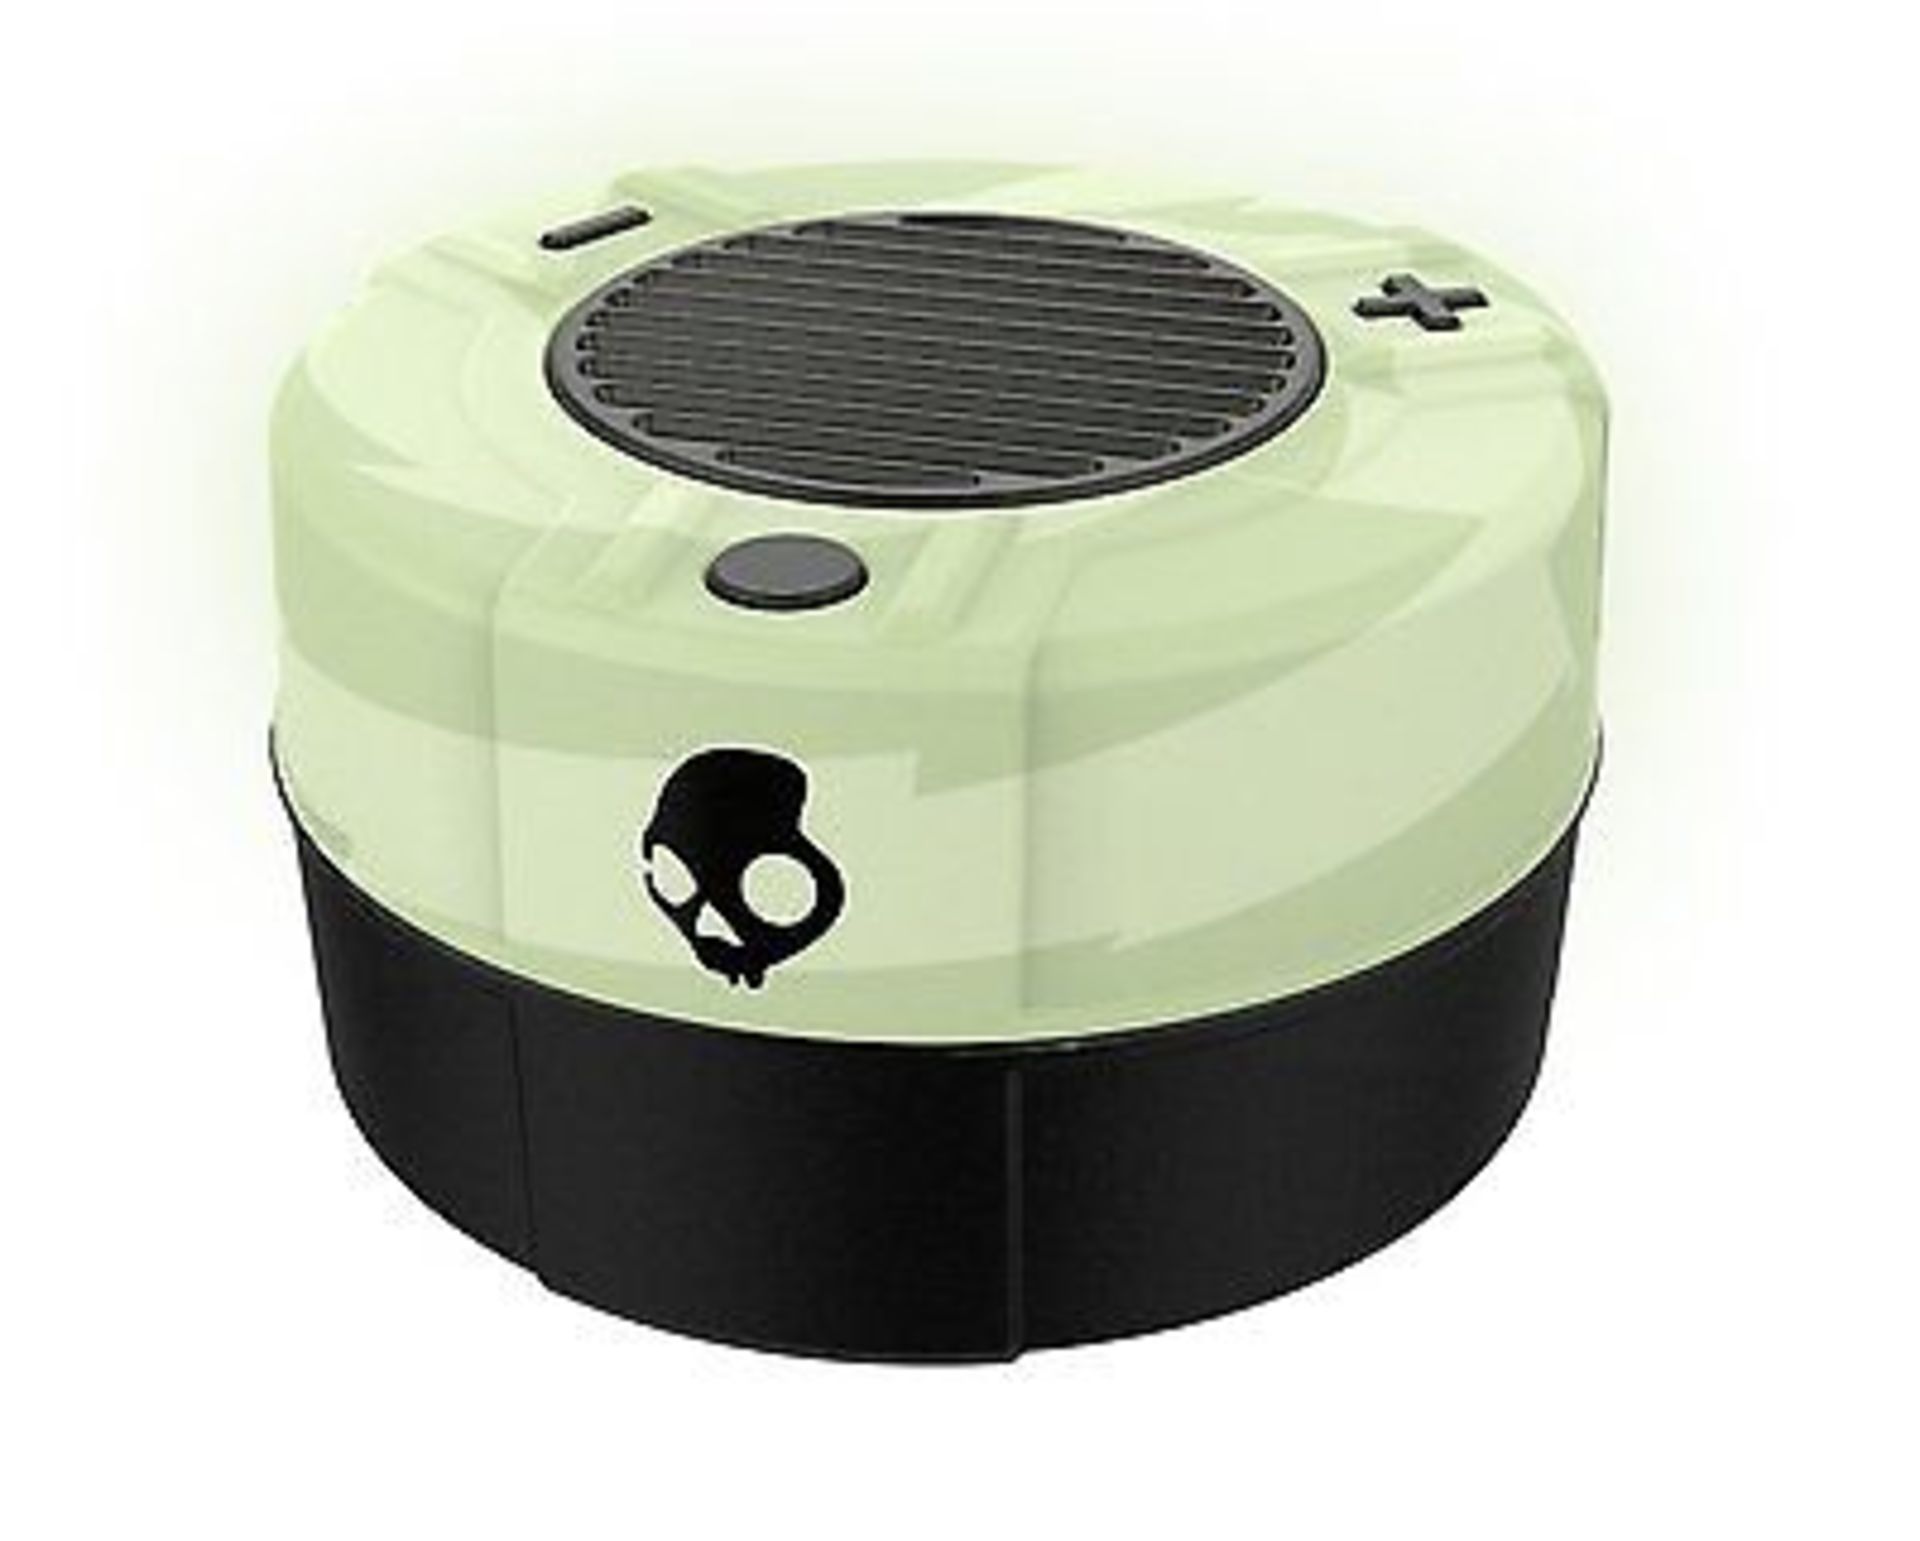 V Brand New Skullcandy Glow in The Dark Wireless Speaker - Blutooth Connection - Drop Proof - - Image 2 of 2